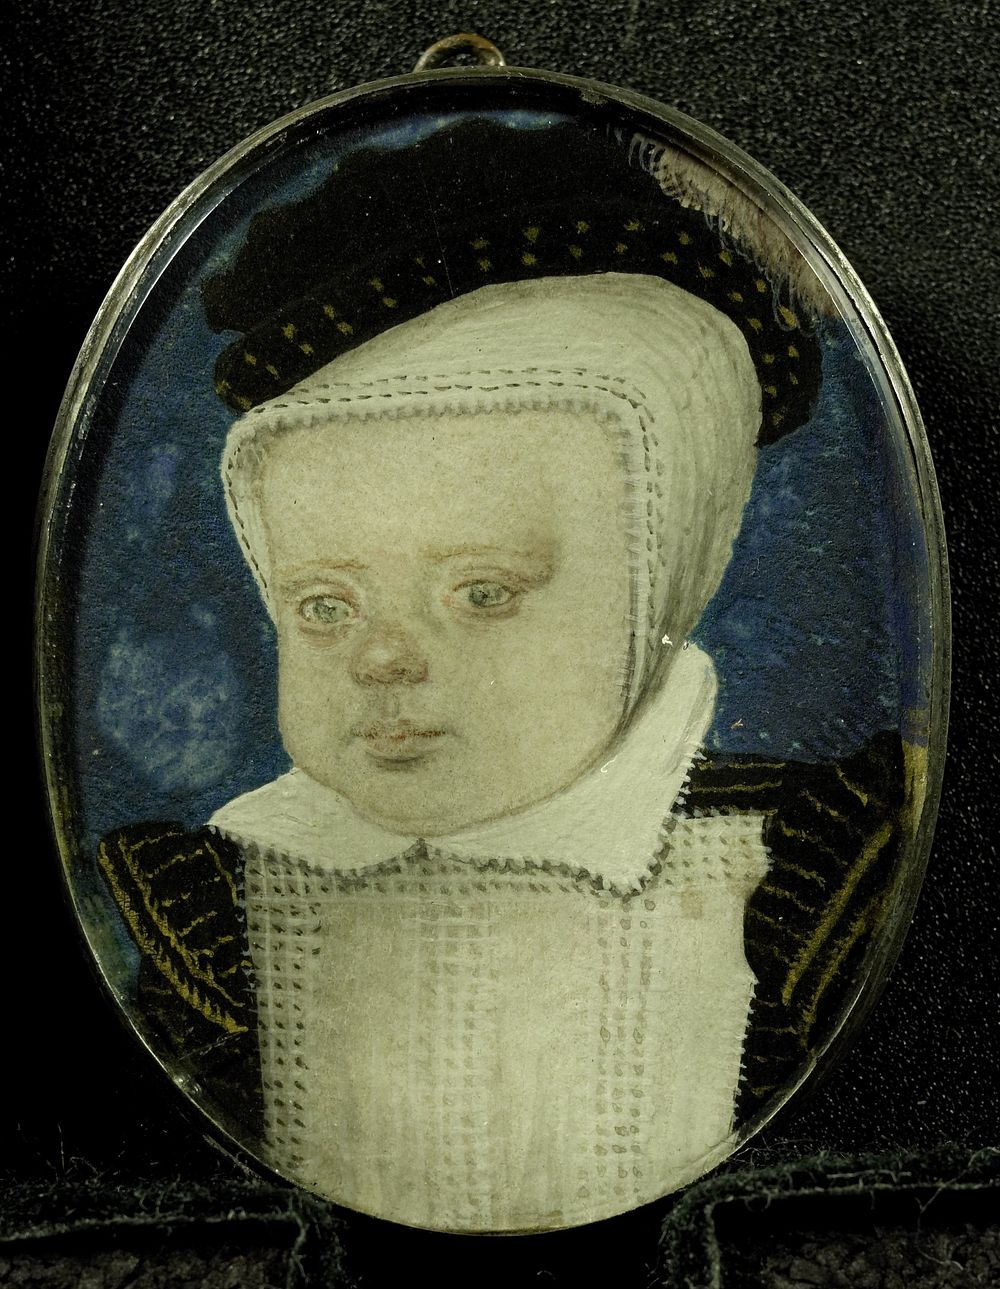 Portrait of Edward VI (1537-53), the future king of England, as a child (1600 - 1699) by anonymous and John Bettes I